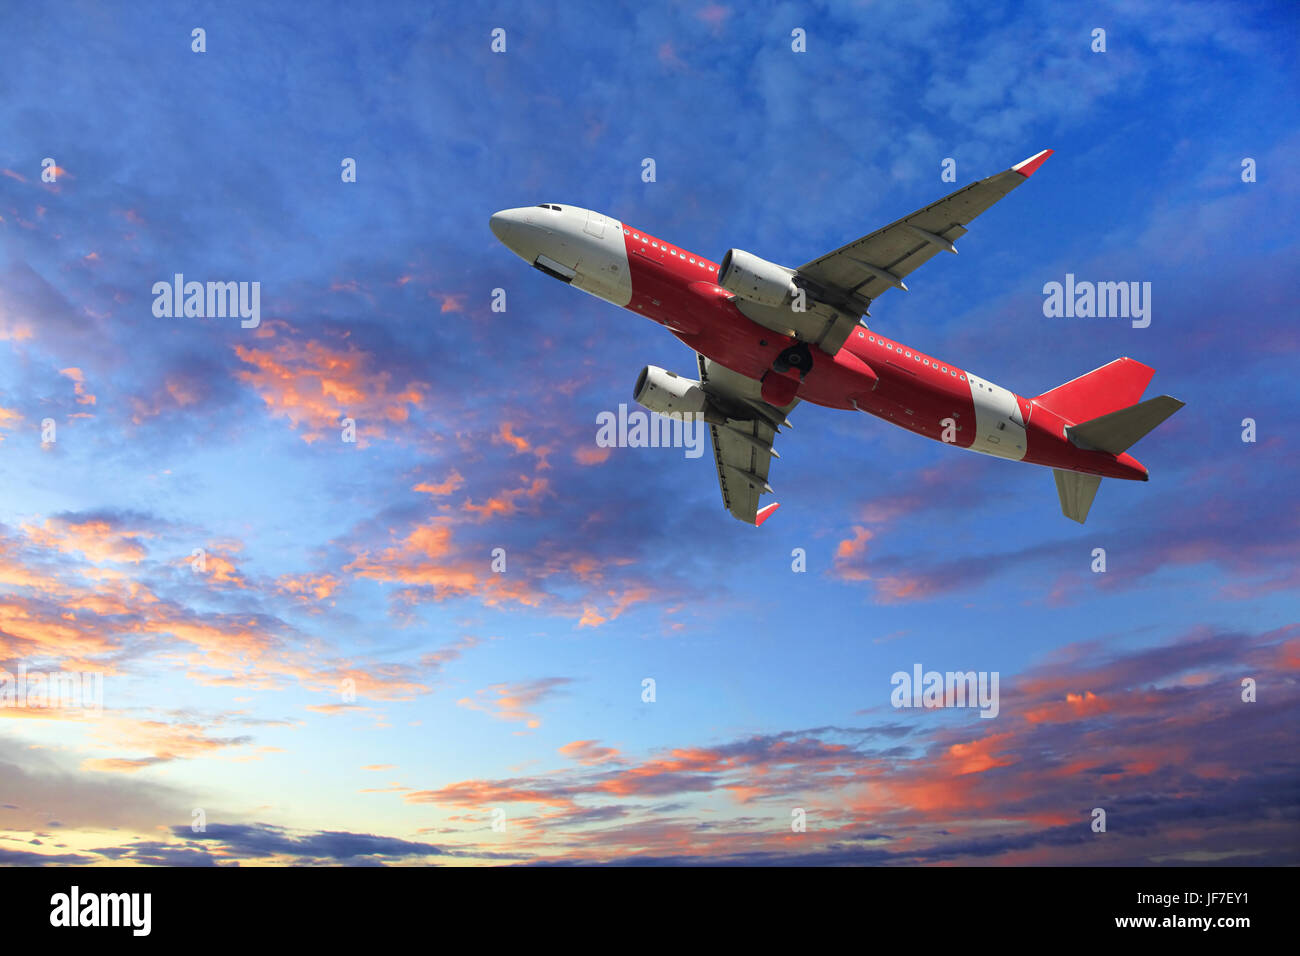 HS-BBH Airbus A320-200 Foto Stock